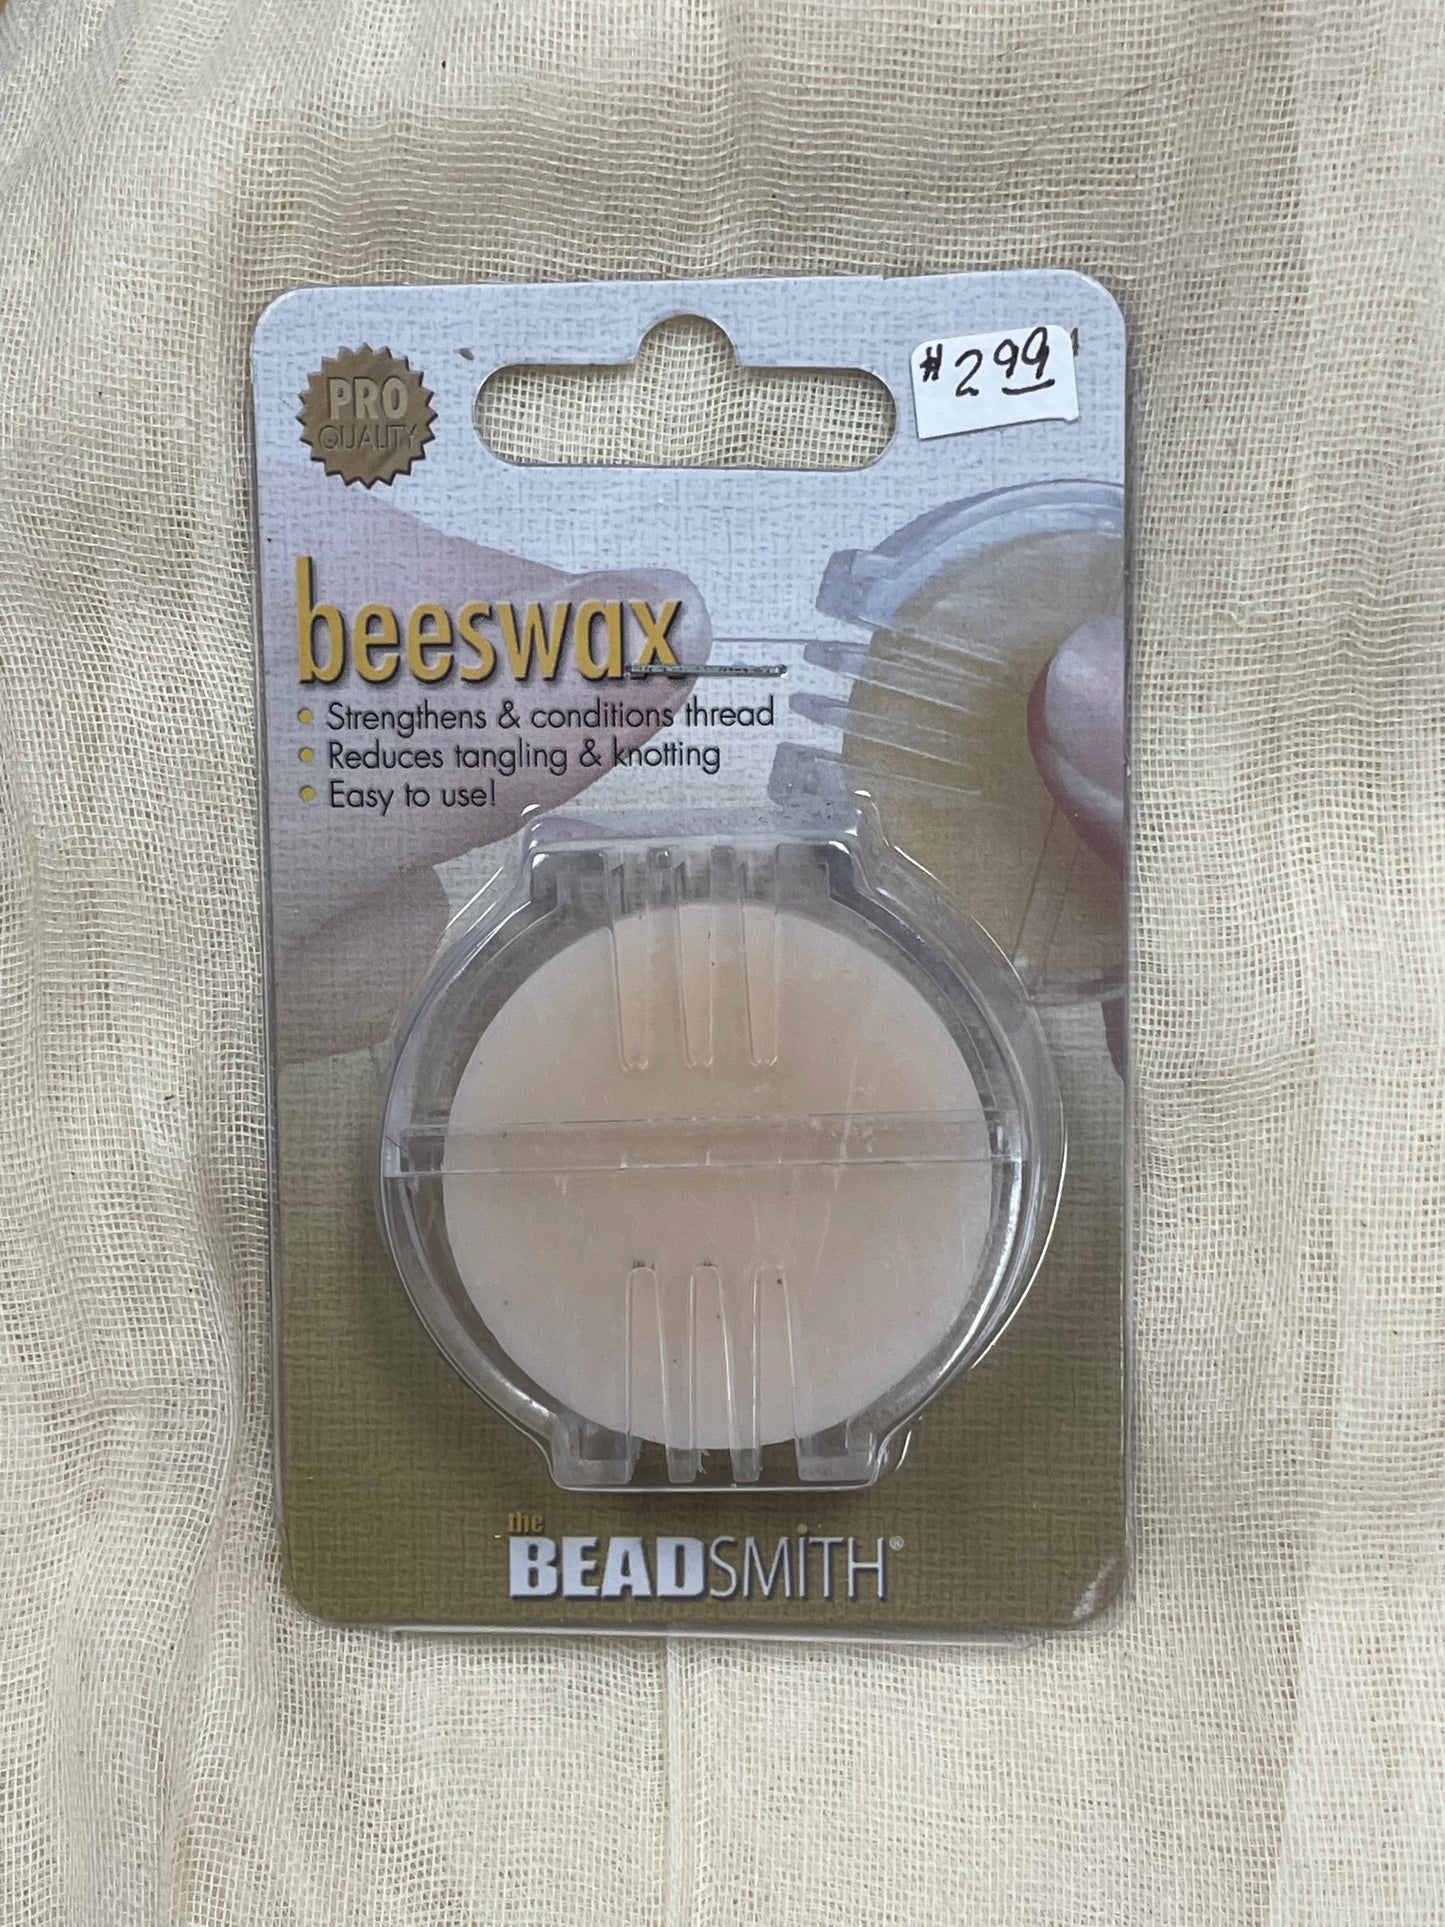 Beeswax in Blister Pack